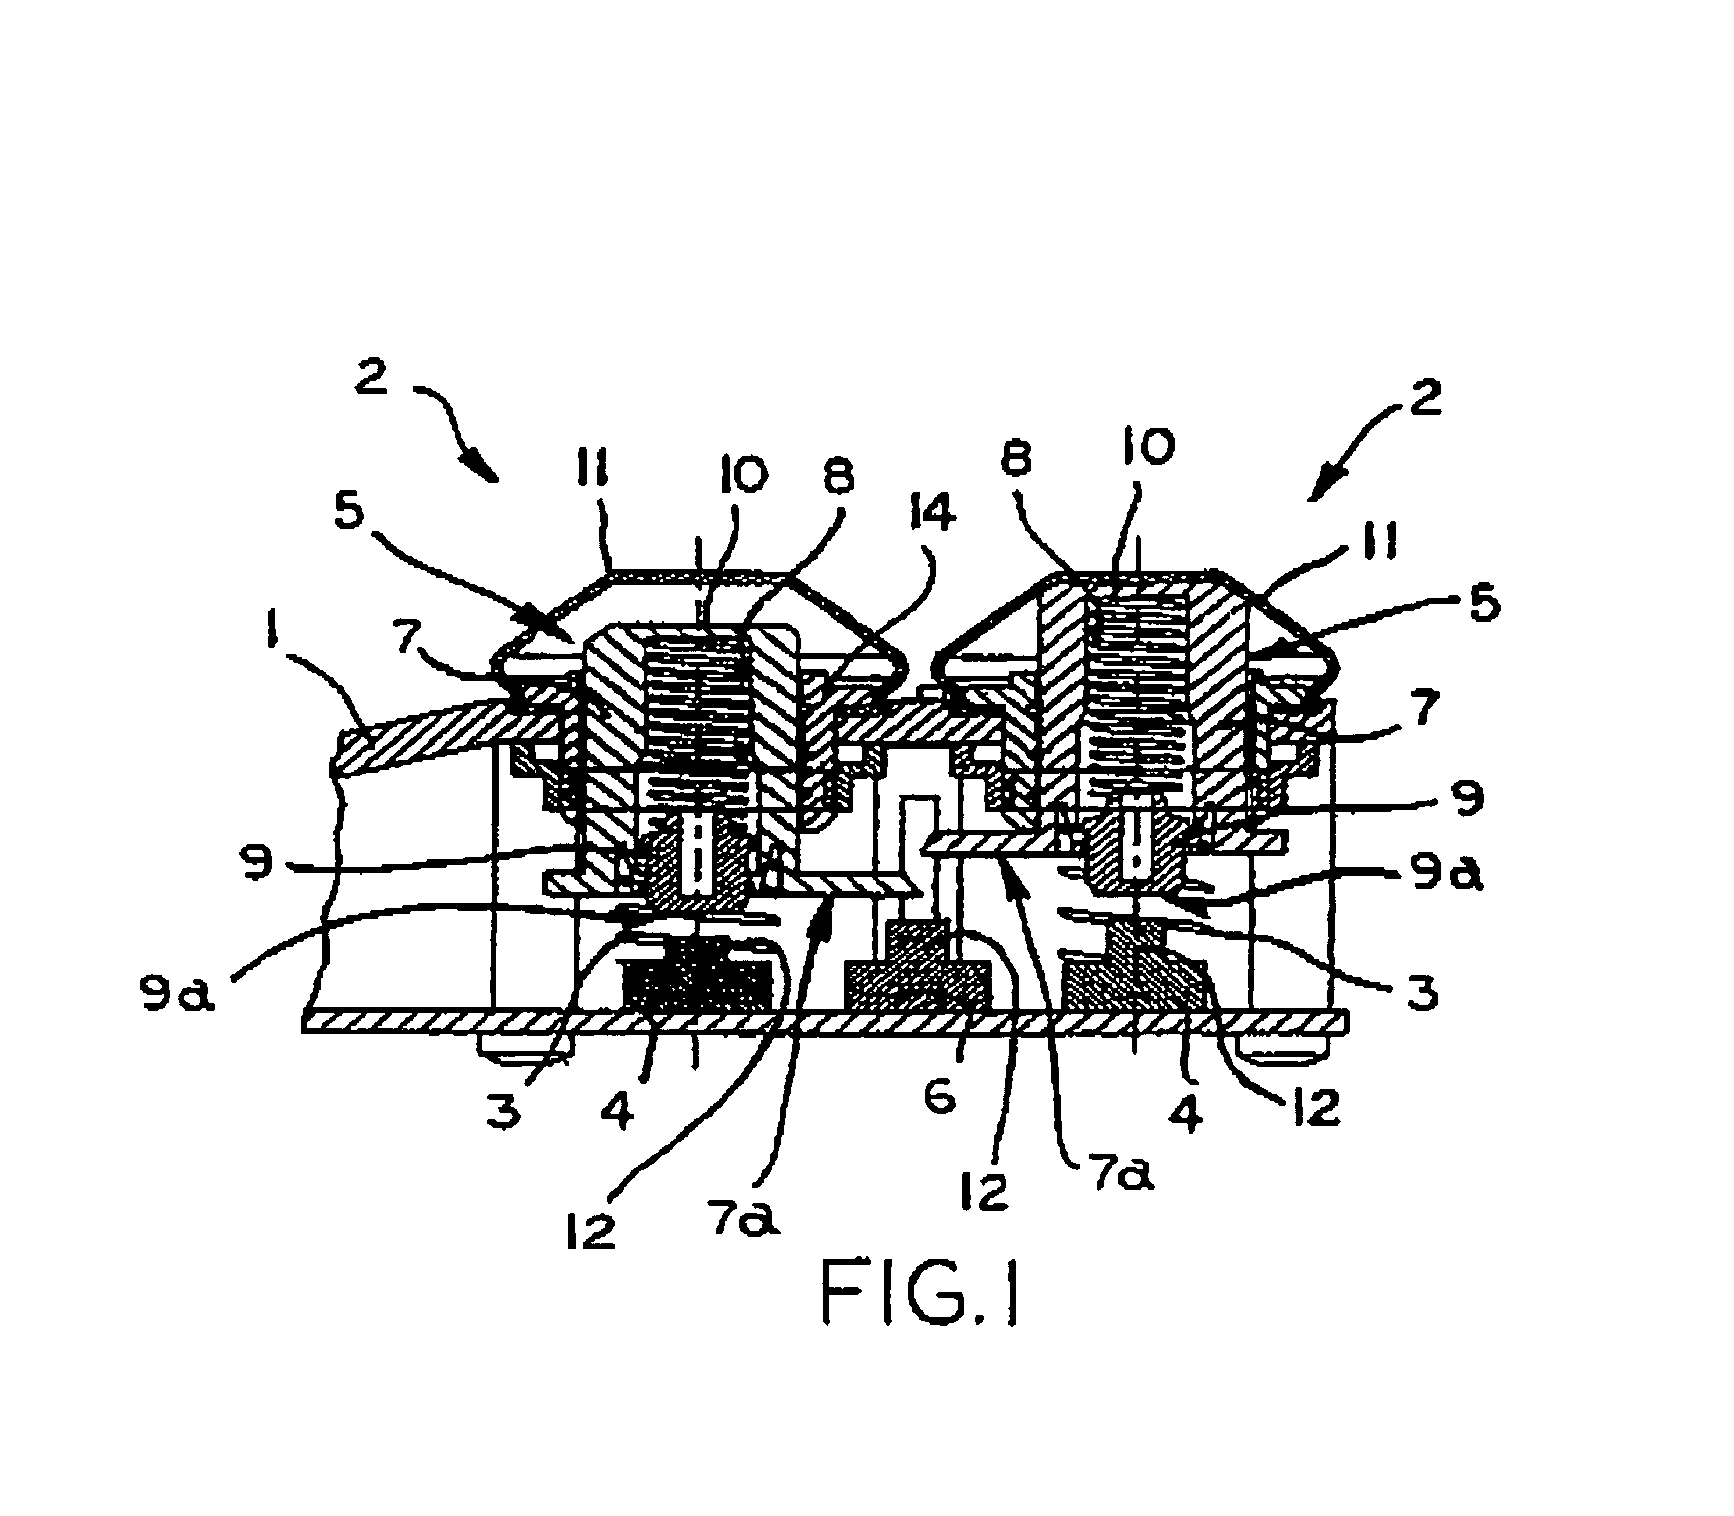 Operating device for manual actuation of hoisting equipment